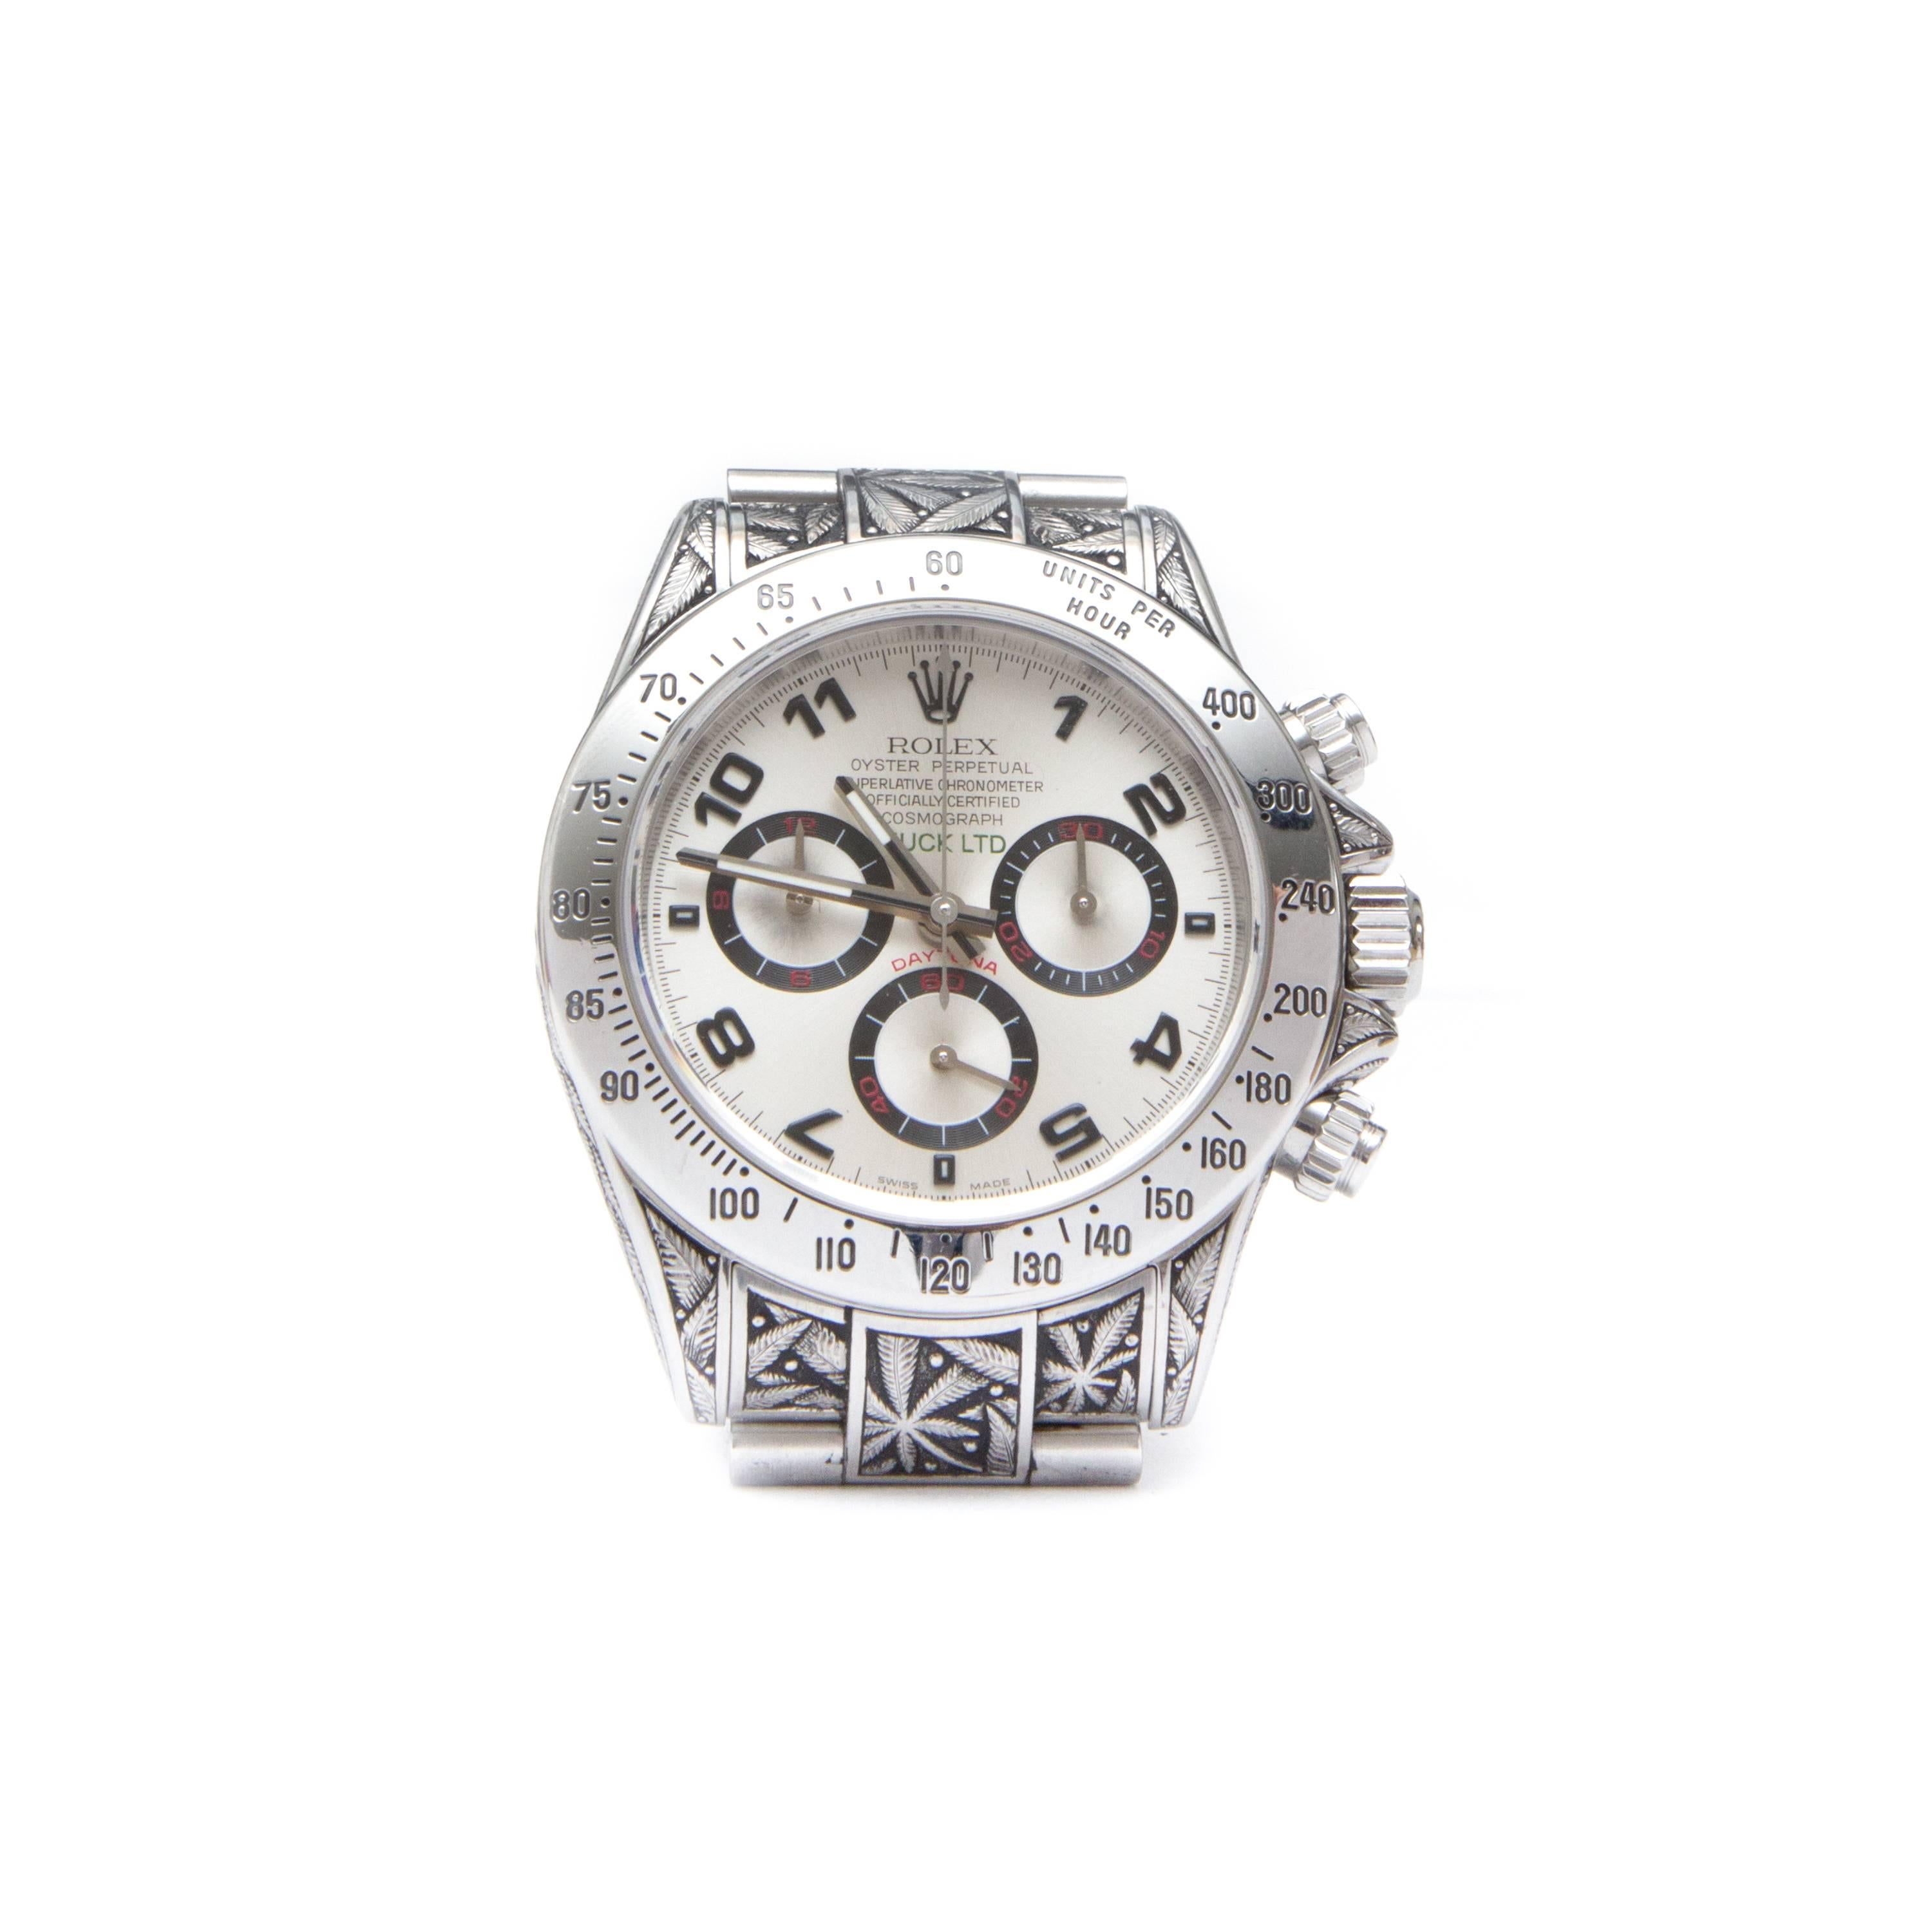 **This item is made-to-order with a 6-8 week lead time**

Huckleberry Ltd engraved stainless steel Rolex Daytona with Mary Jane motif, silver dial, suede lined wooden box and lifetime warrantee.